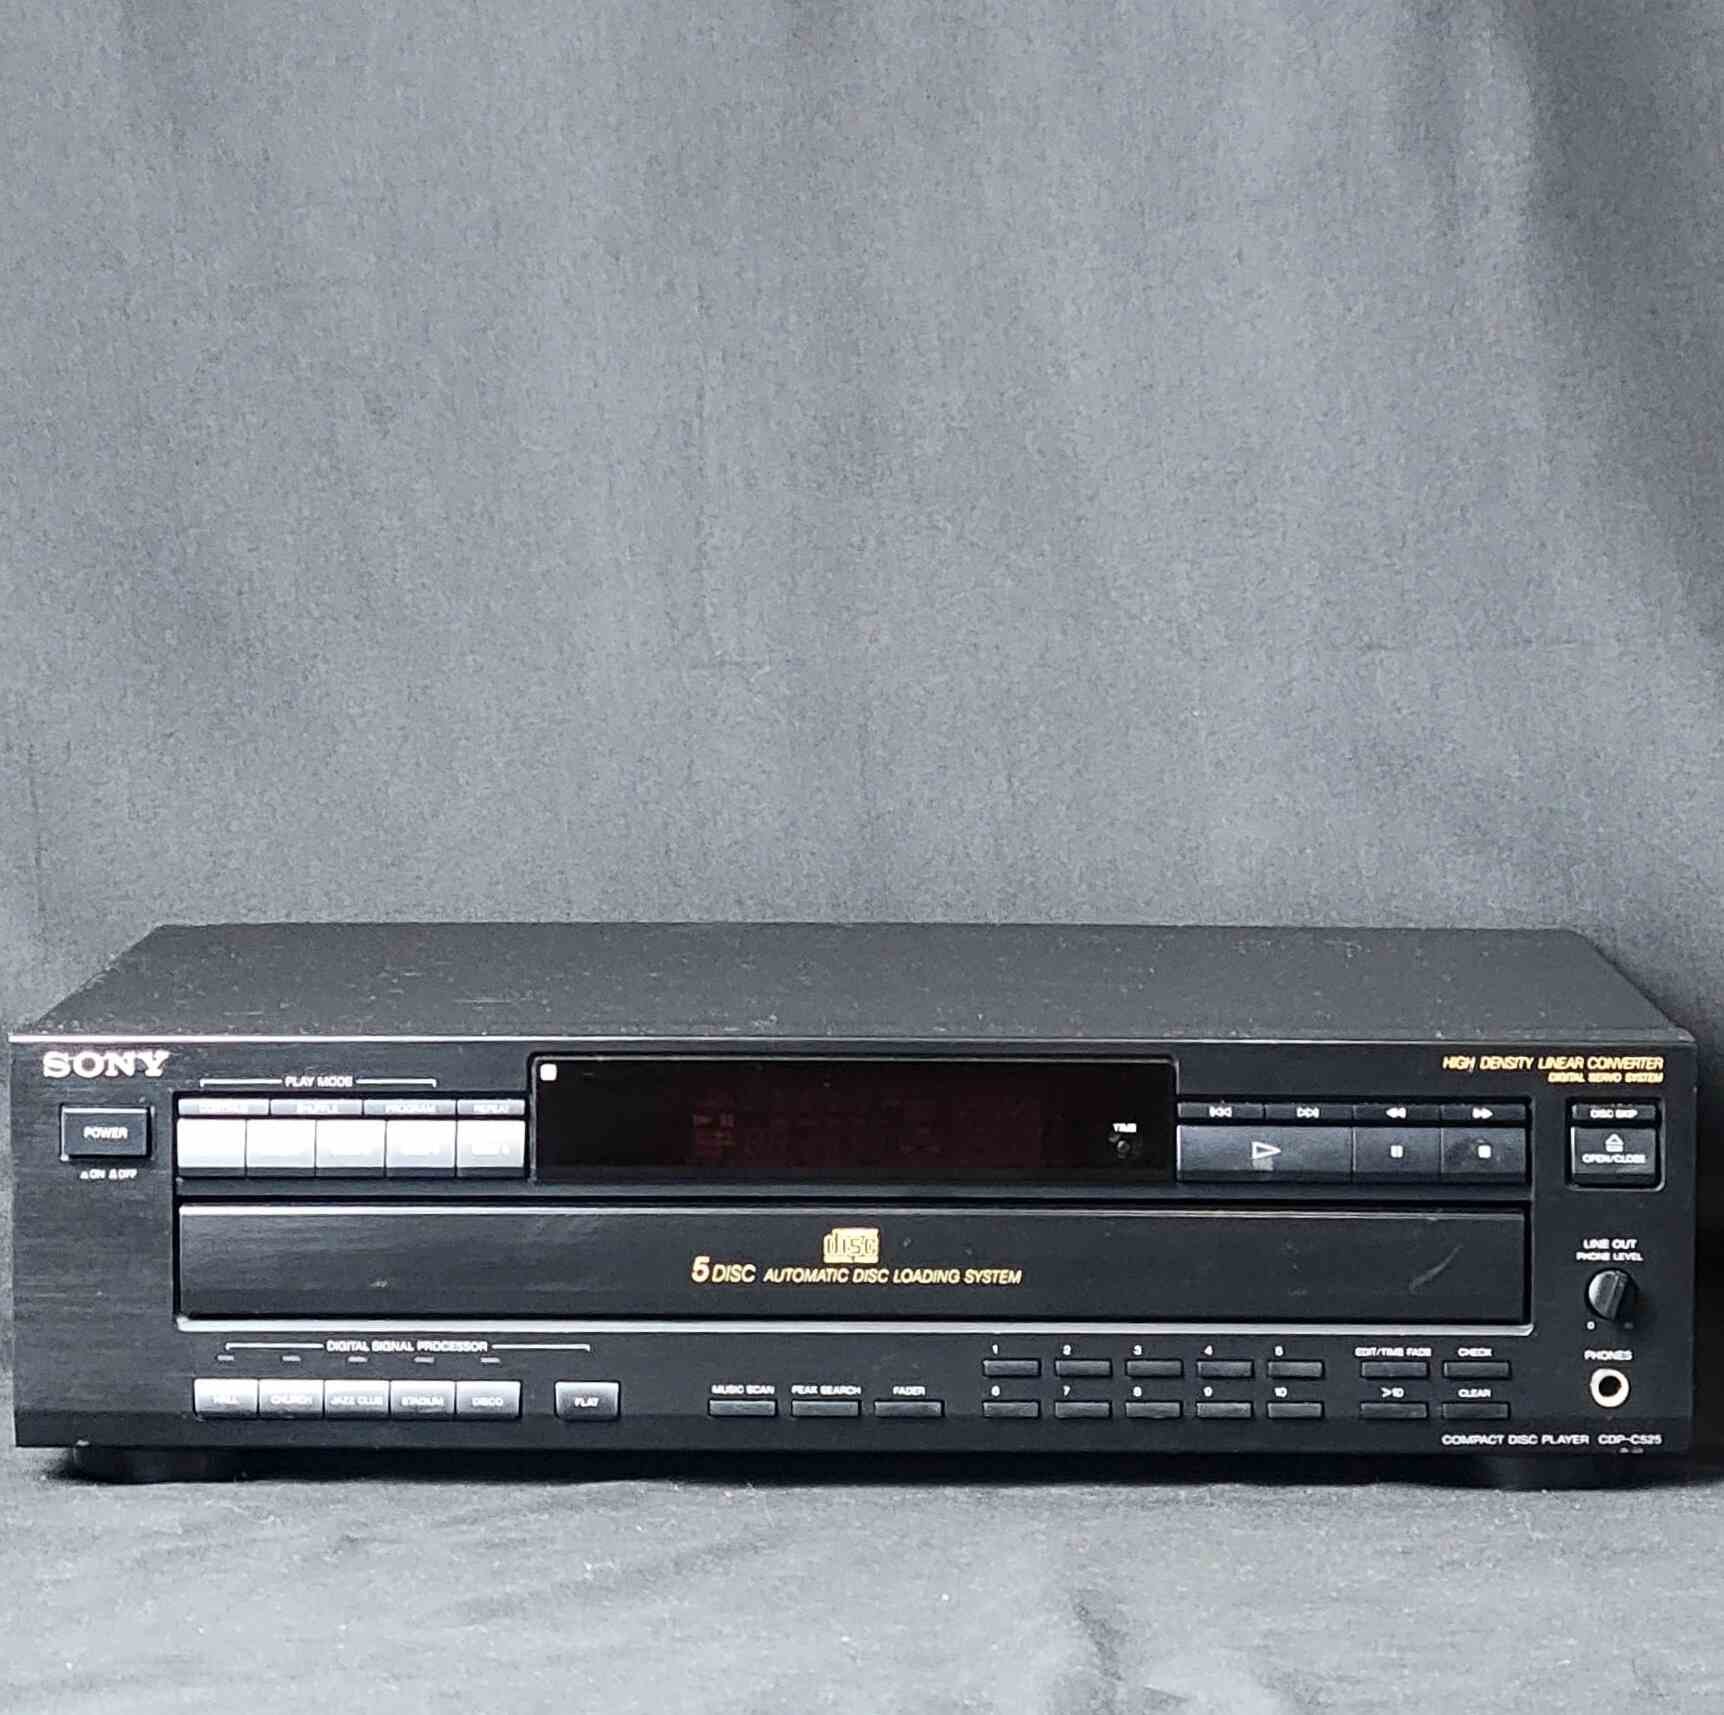 Sony Cdp-c225 High Density Linear Converter 5 Compact Disc Cd Player 